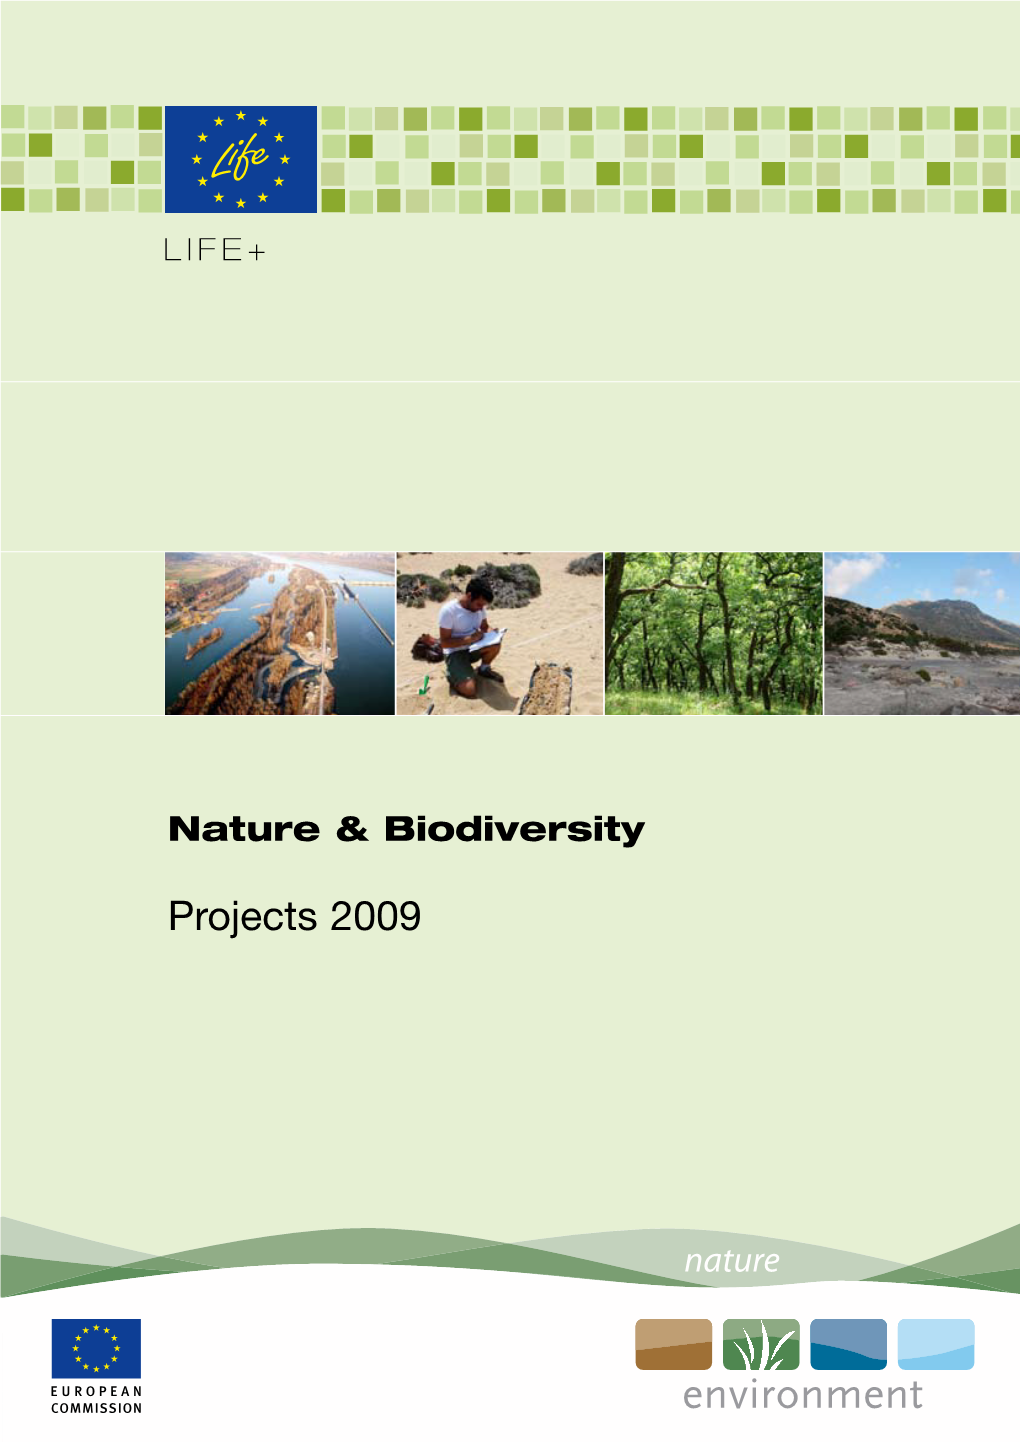 LIFE Nature & Biodiversity Projects 2009